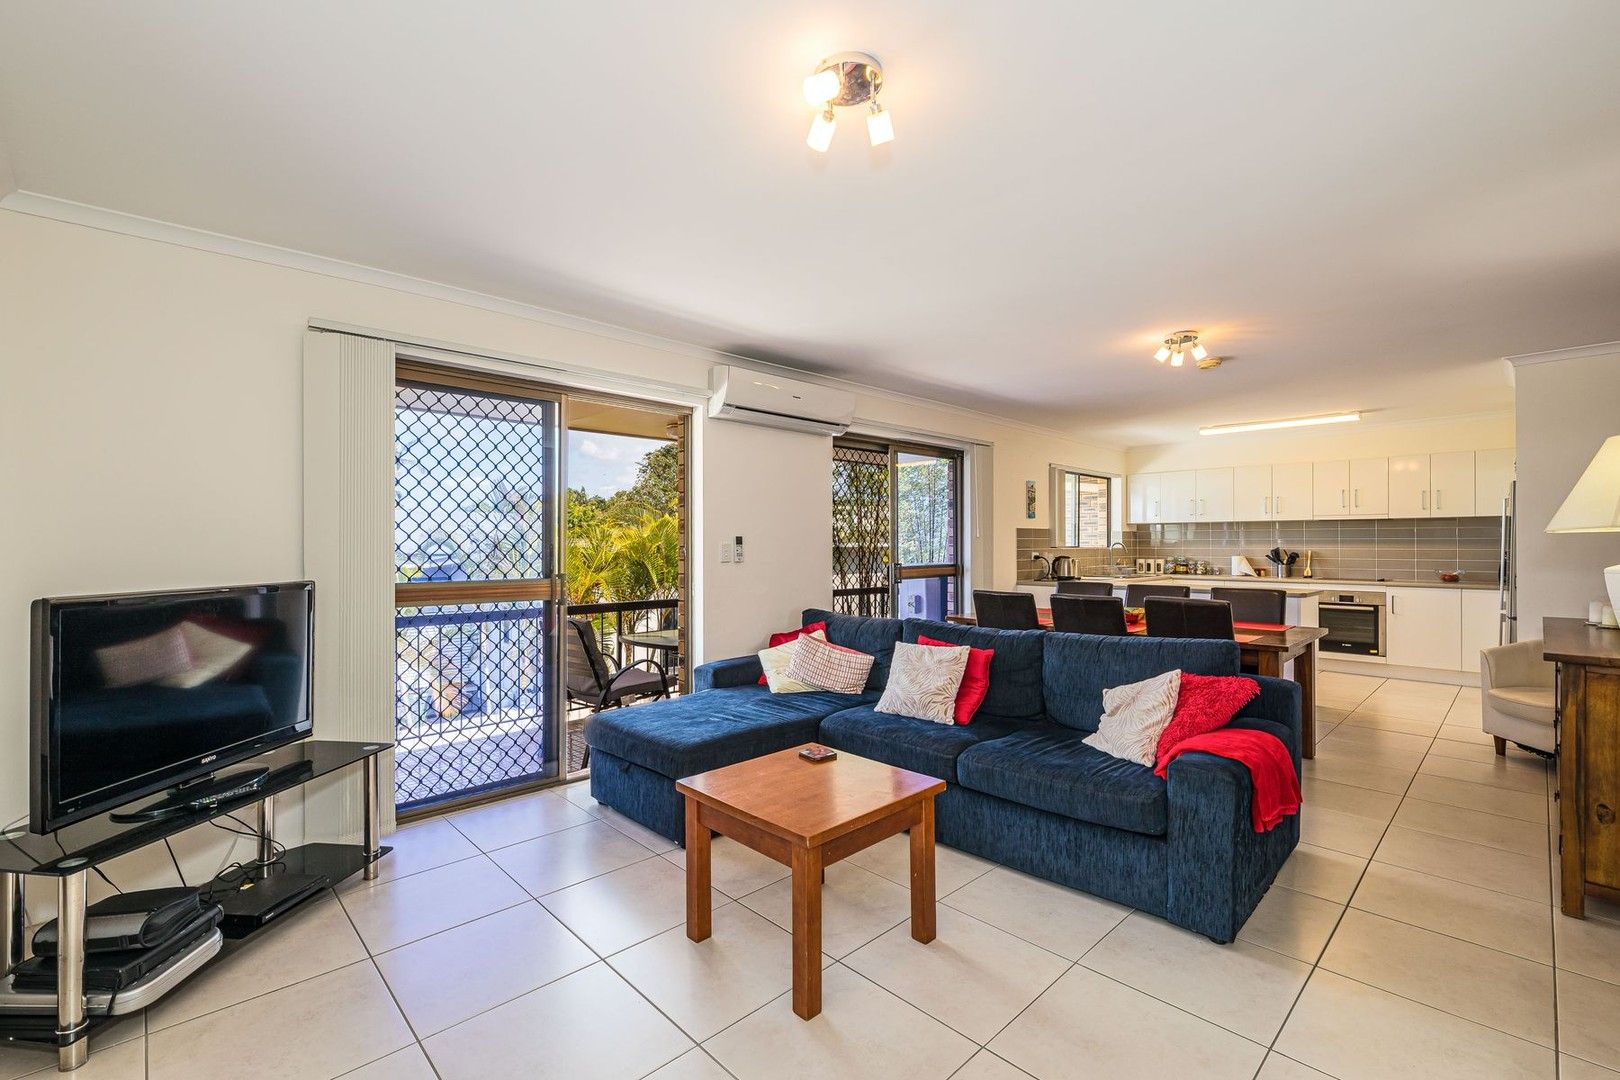 2 bedrooms Apartment / Unit / Flat in 3/10 Fourth Avenue BONGAREE QLD, 4507